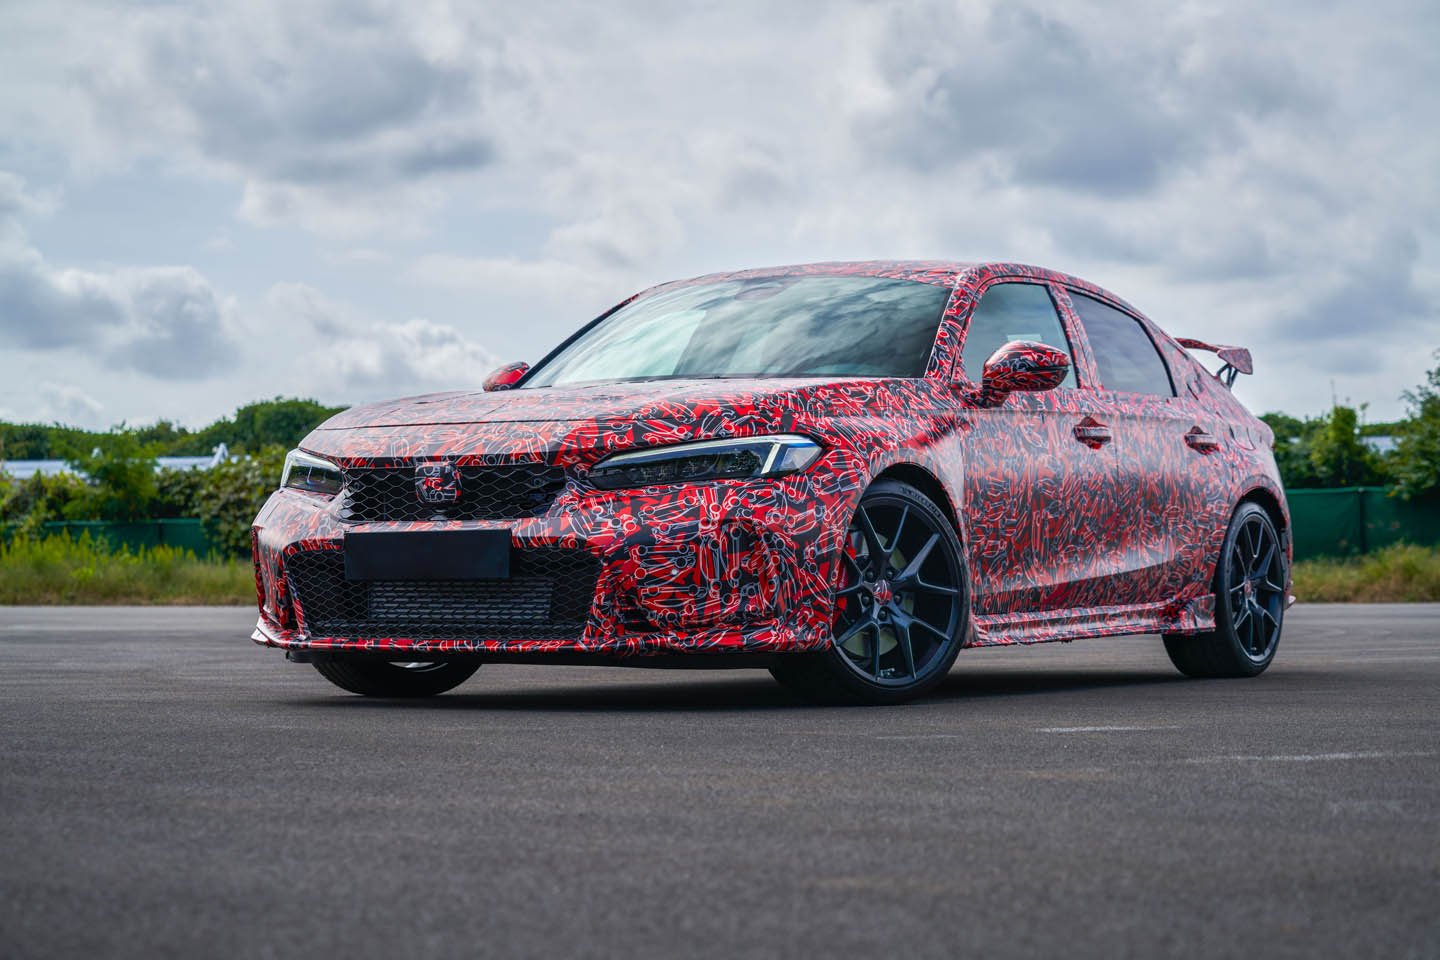 Next Gen Honda Civic Type R Officially Teased: “Ready for Nürburgring Testing”